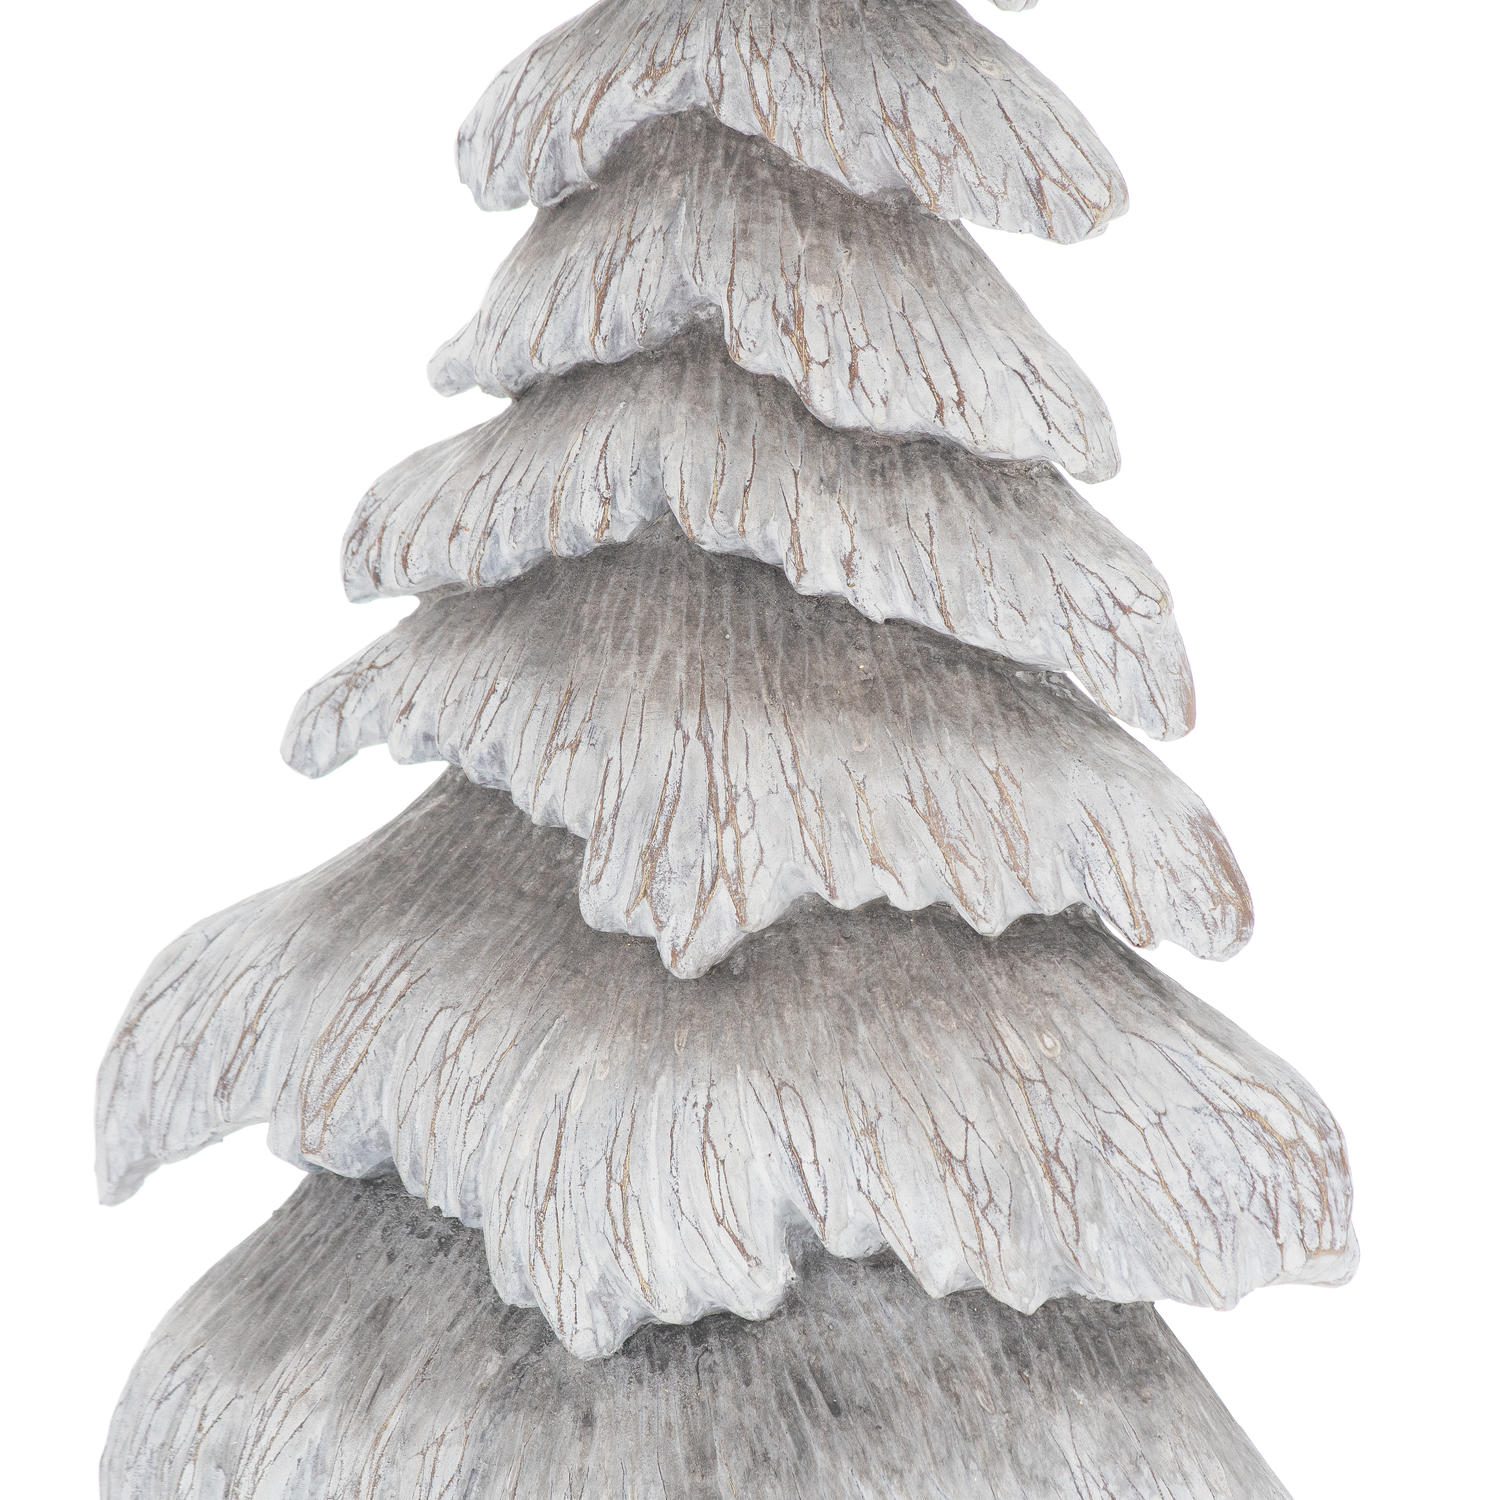 Carved Wood Effect Grey Small Snowy Tree - Image 2